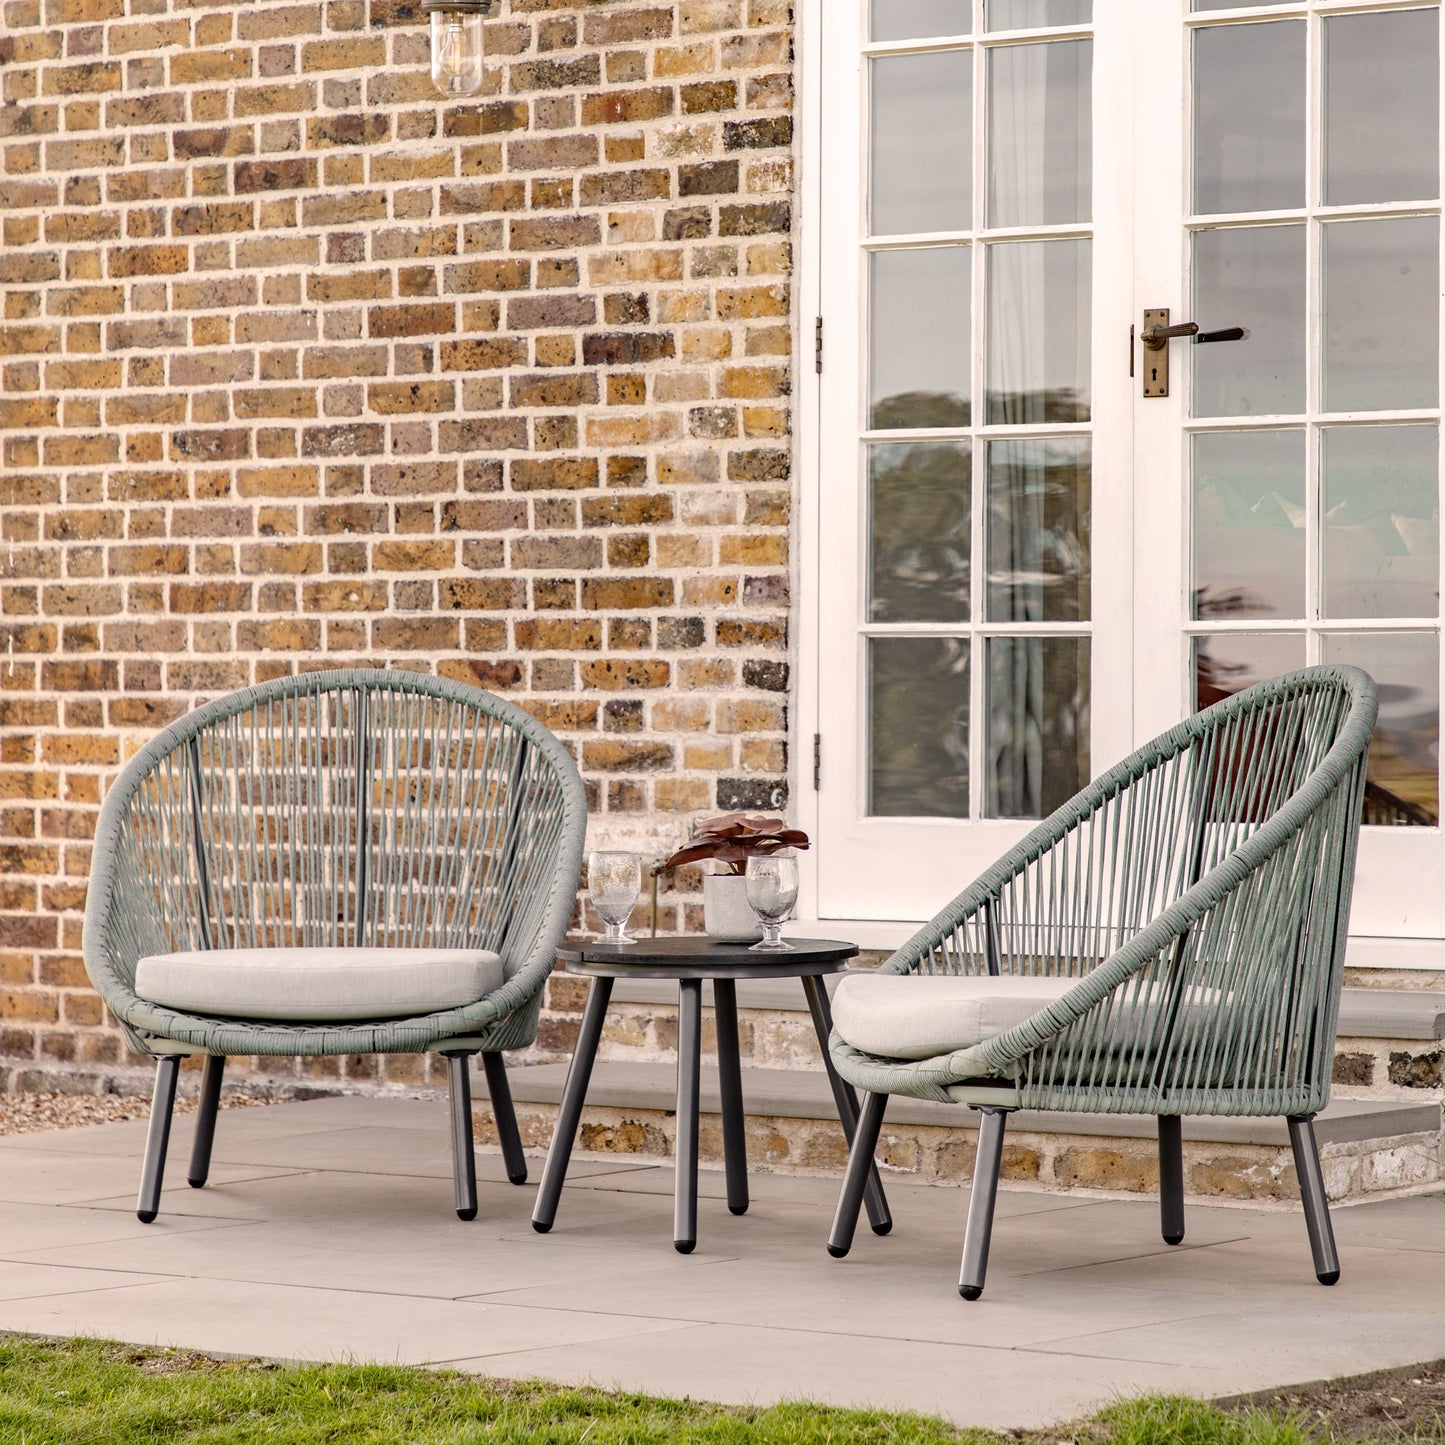 Two Lamerton 2 Seater Bistro Set Sage chairs from Kikiathome.co.uk adding style to interior decor in front of a brick wall.